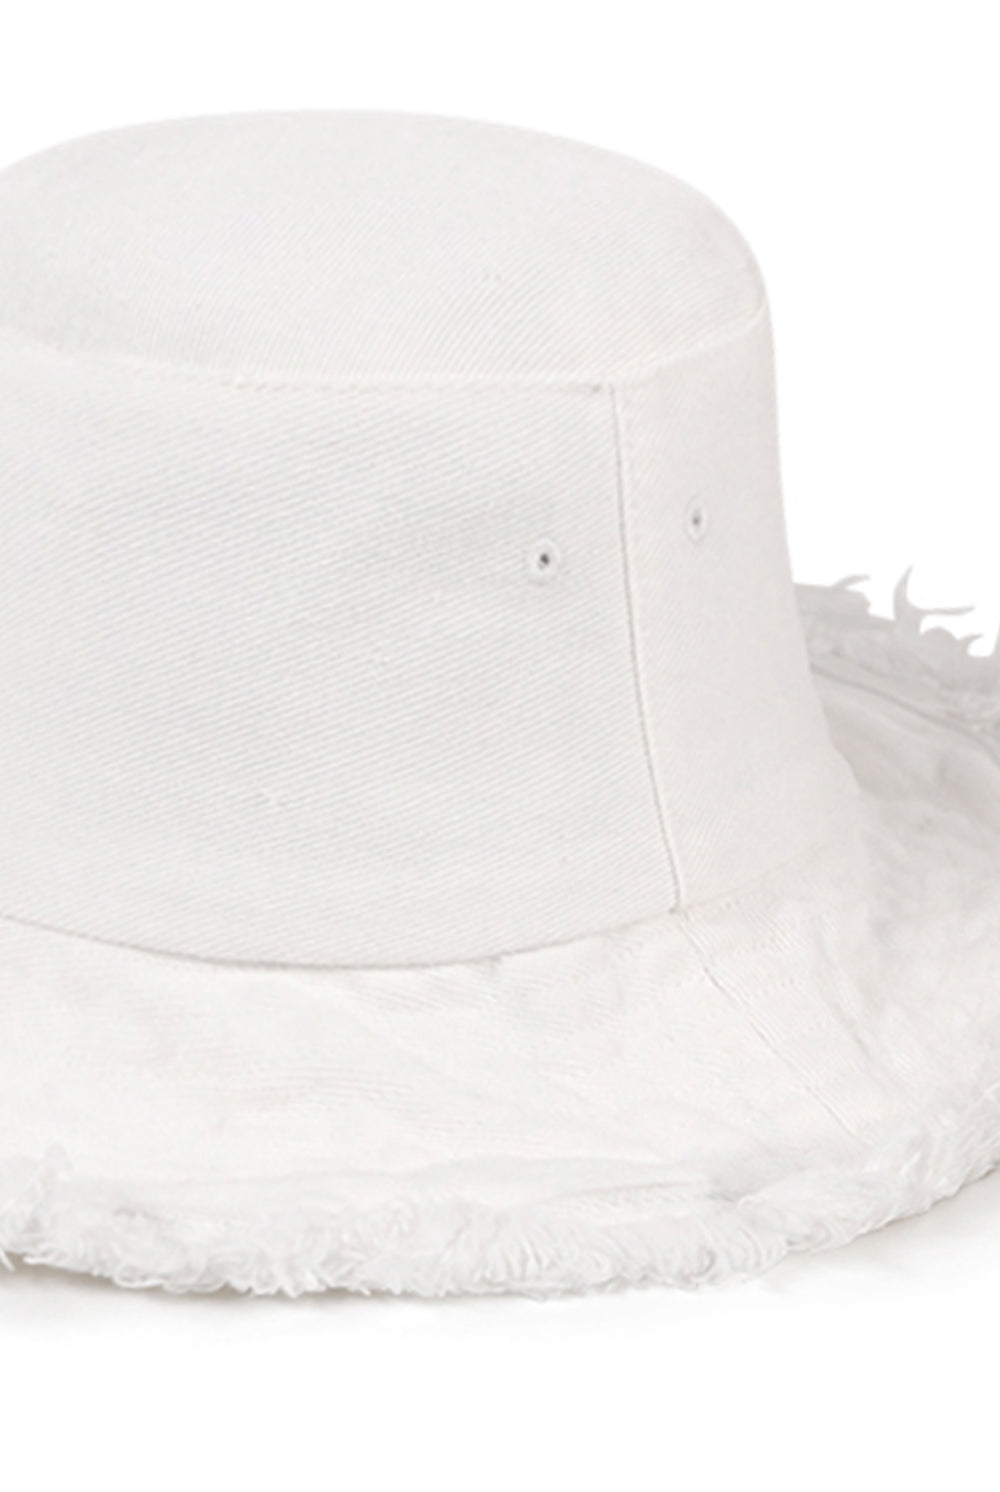 My Accessories London Frayed Edge Bucket Hat in White | Holiday | Beach | Festival | Hen Do | Frayed | Distressed | Minimal | Summer | Hat | Hats | Women's | Women's Accessories |